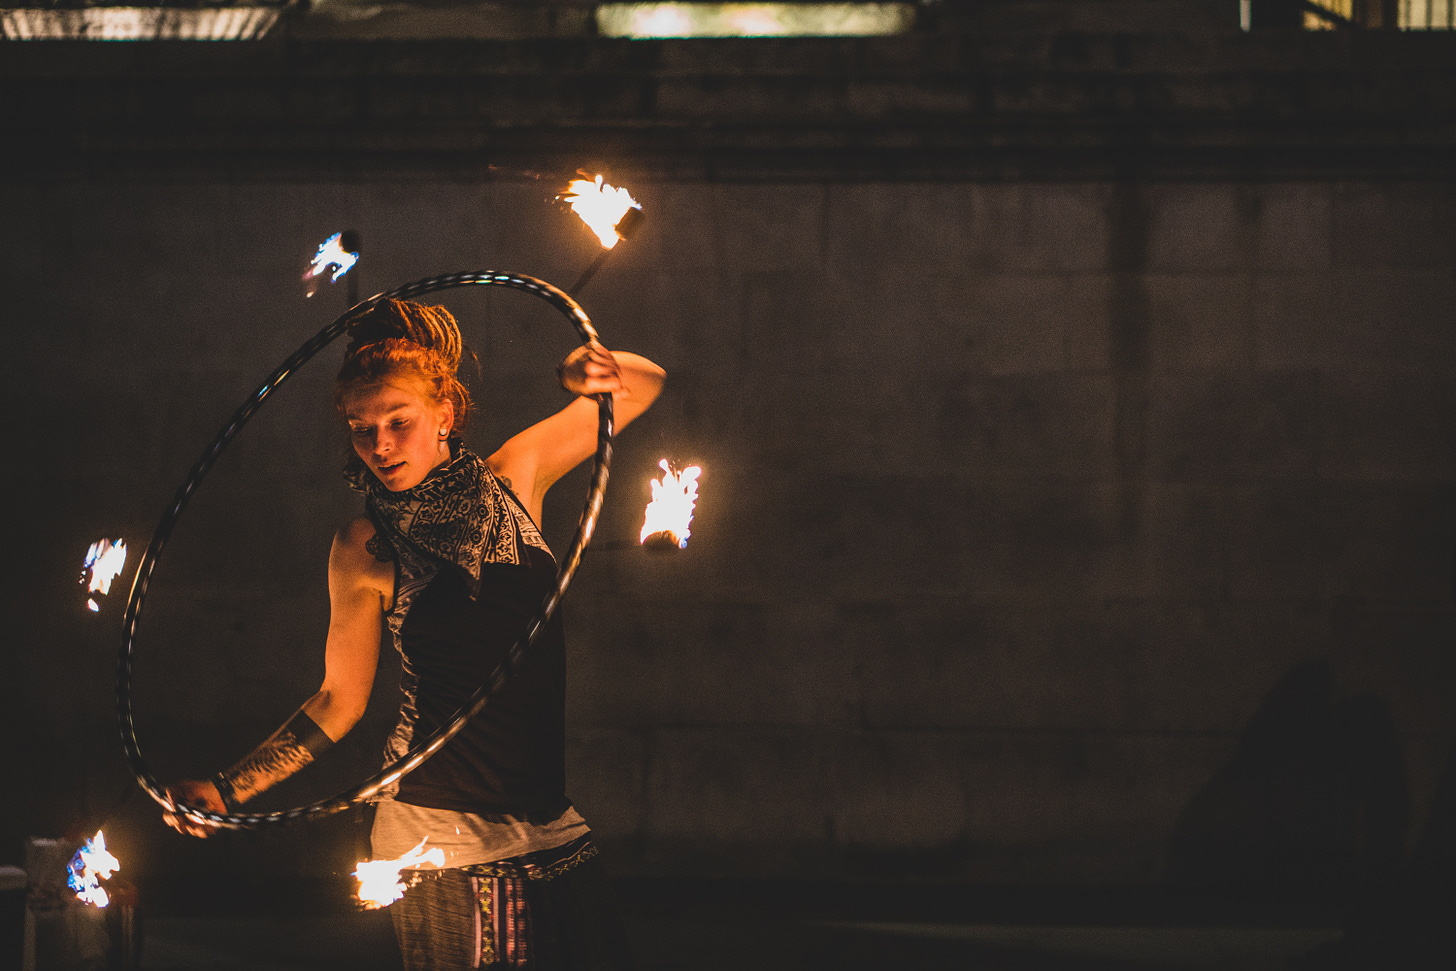 Photo of a performer by Conor Samuel on unsplash